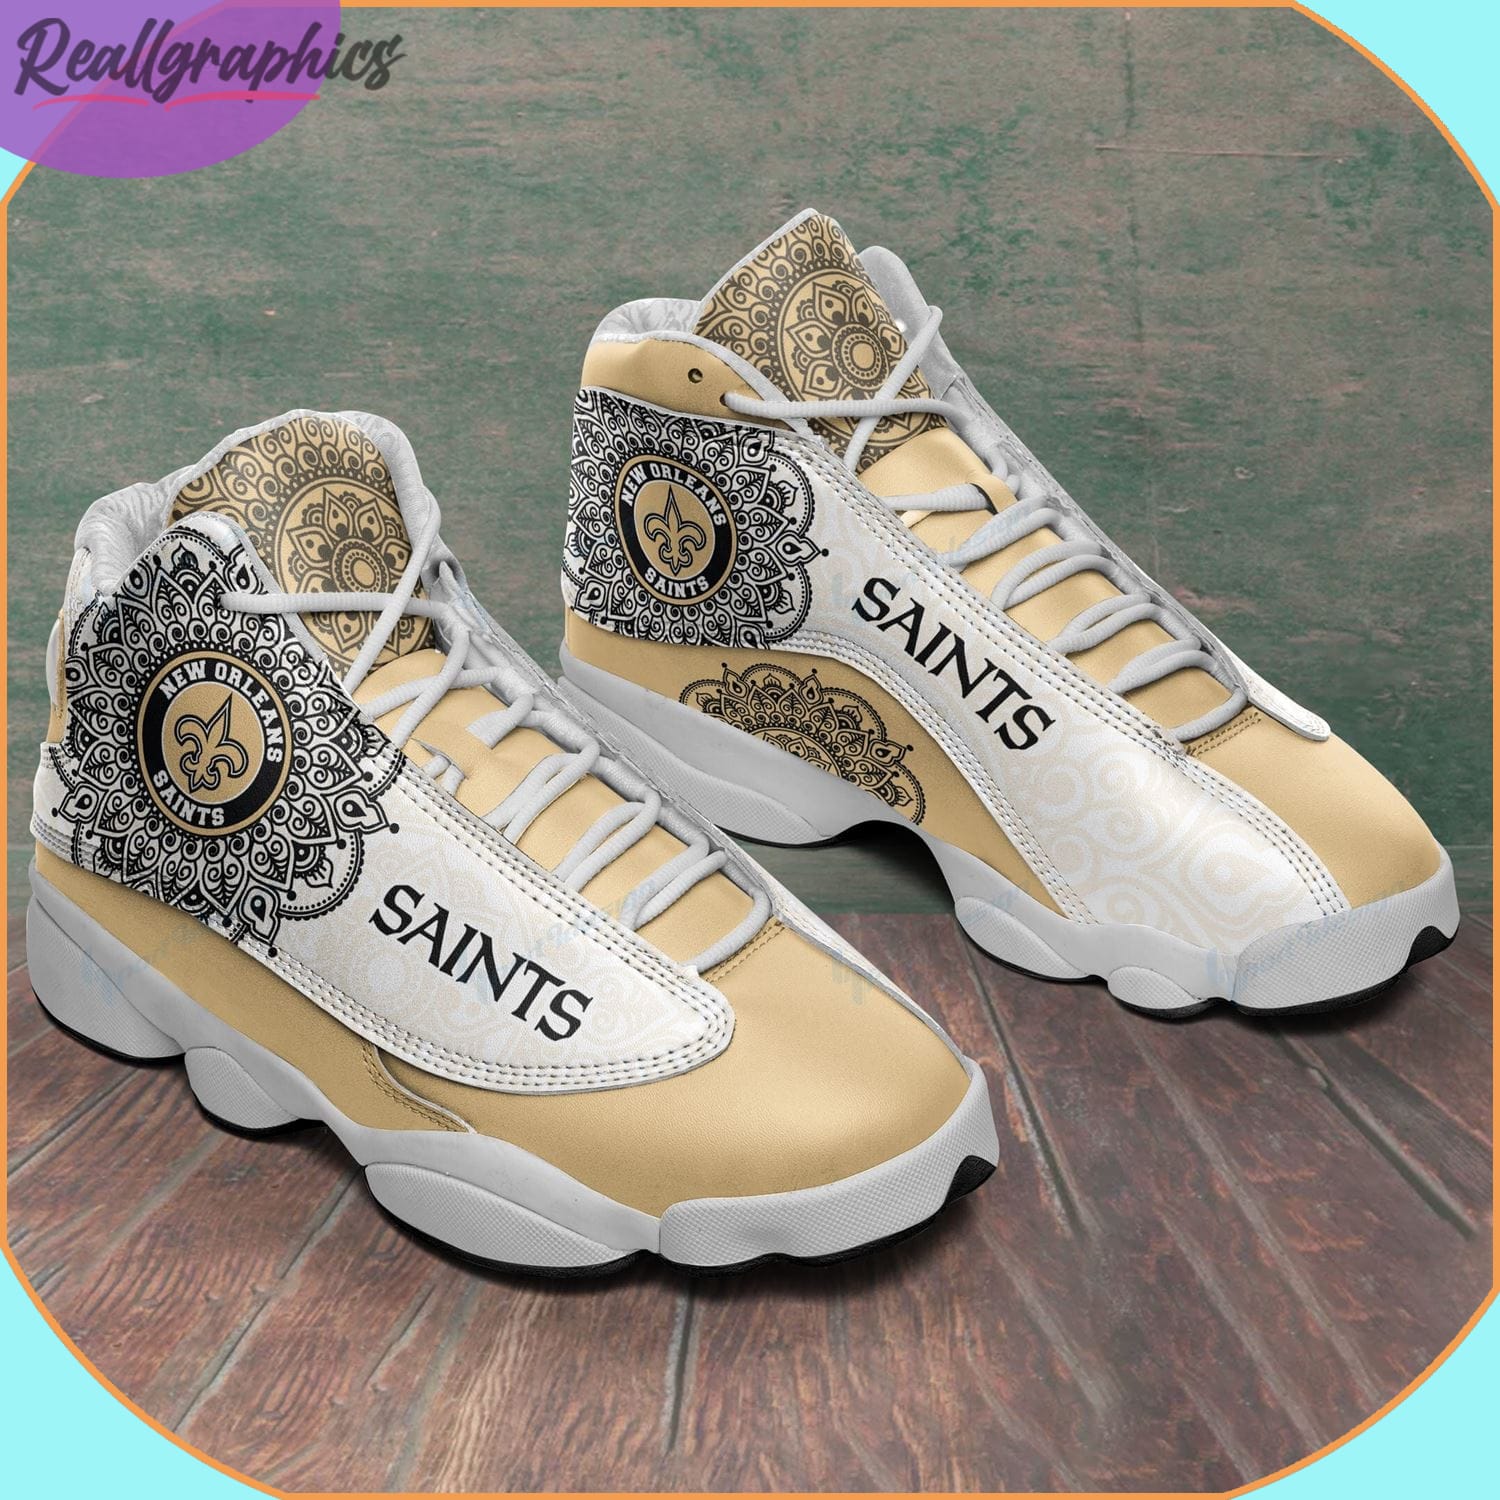 New Orleans Saints AJordan 13 Sneakers, Gifts for New Orleans Saints Fans